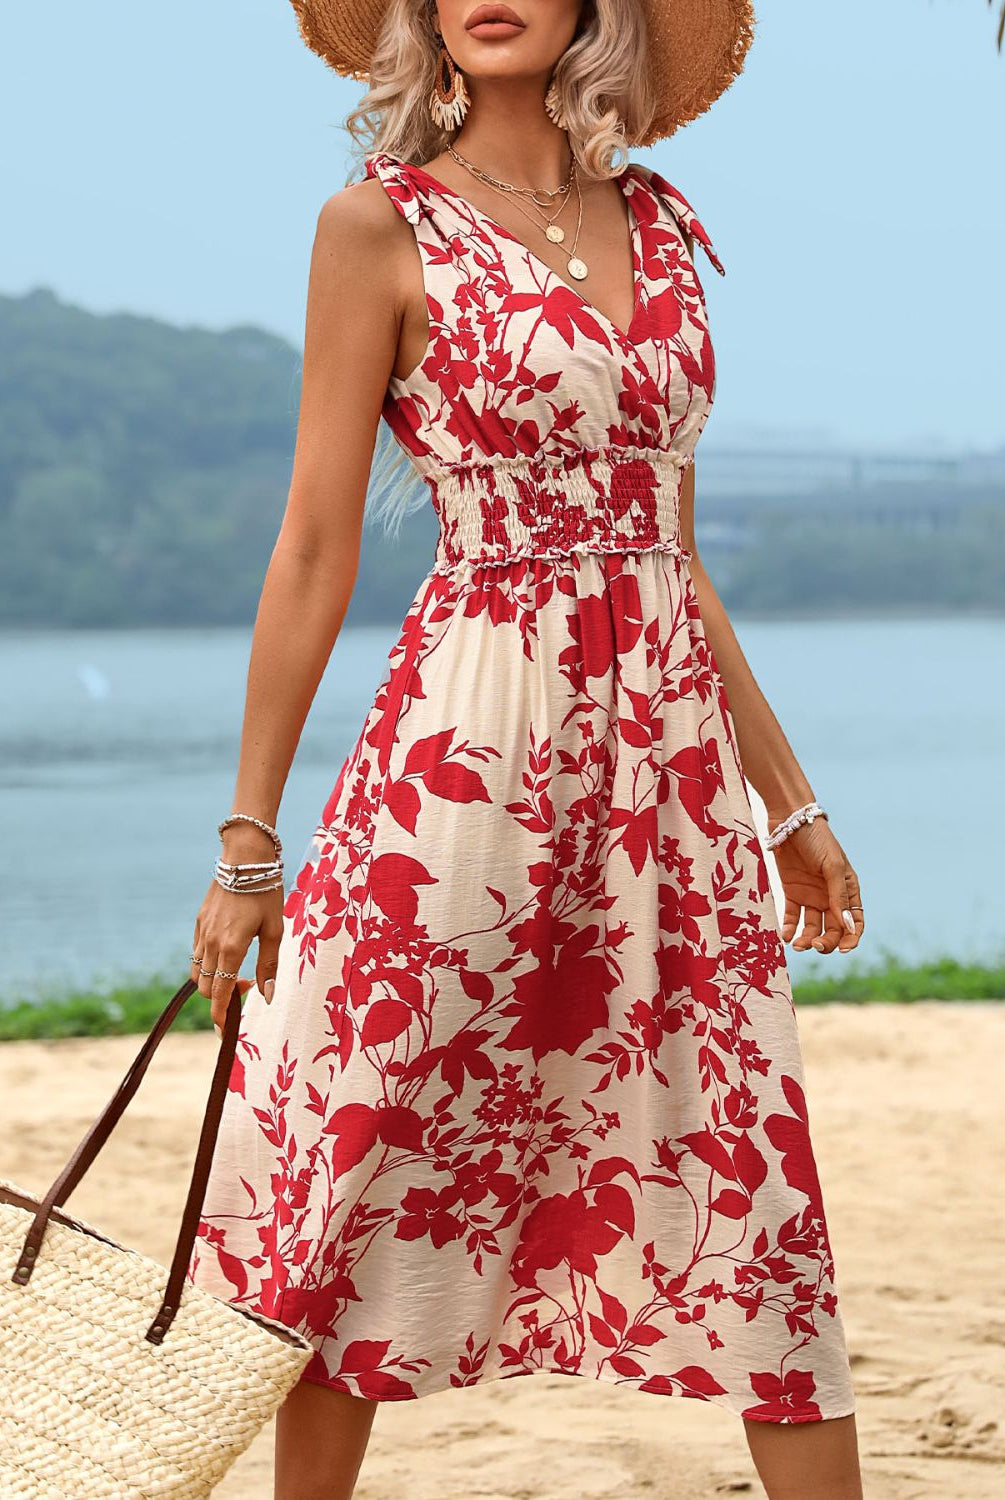 Chic red printed smocked midi dress with a surplice neckline, perfect for summer outings and casual occasions.